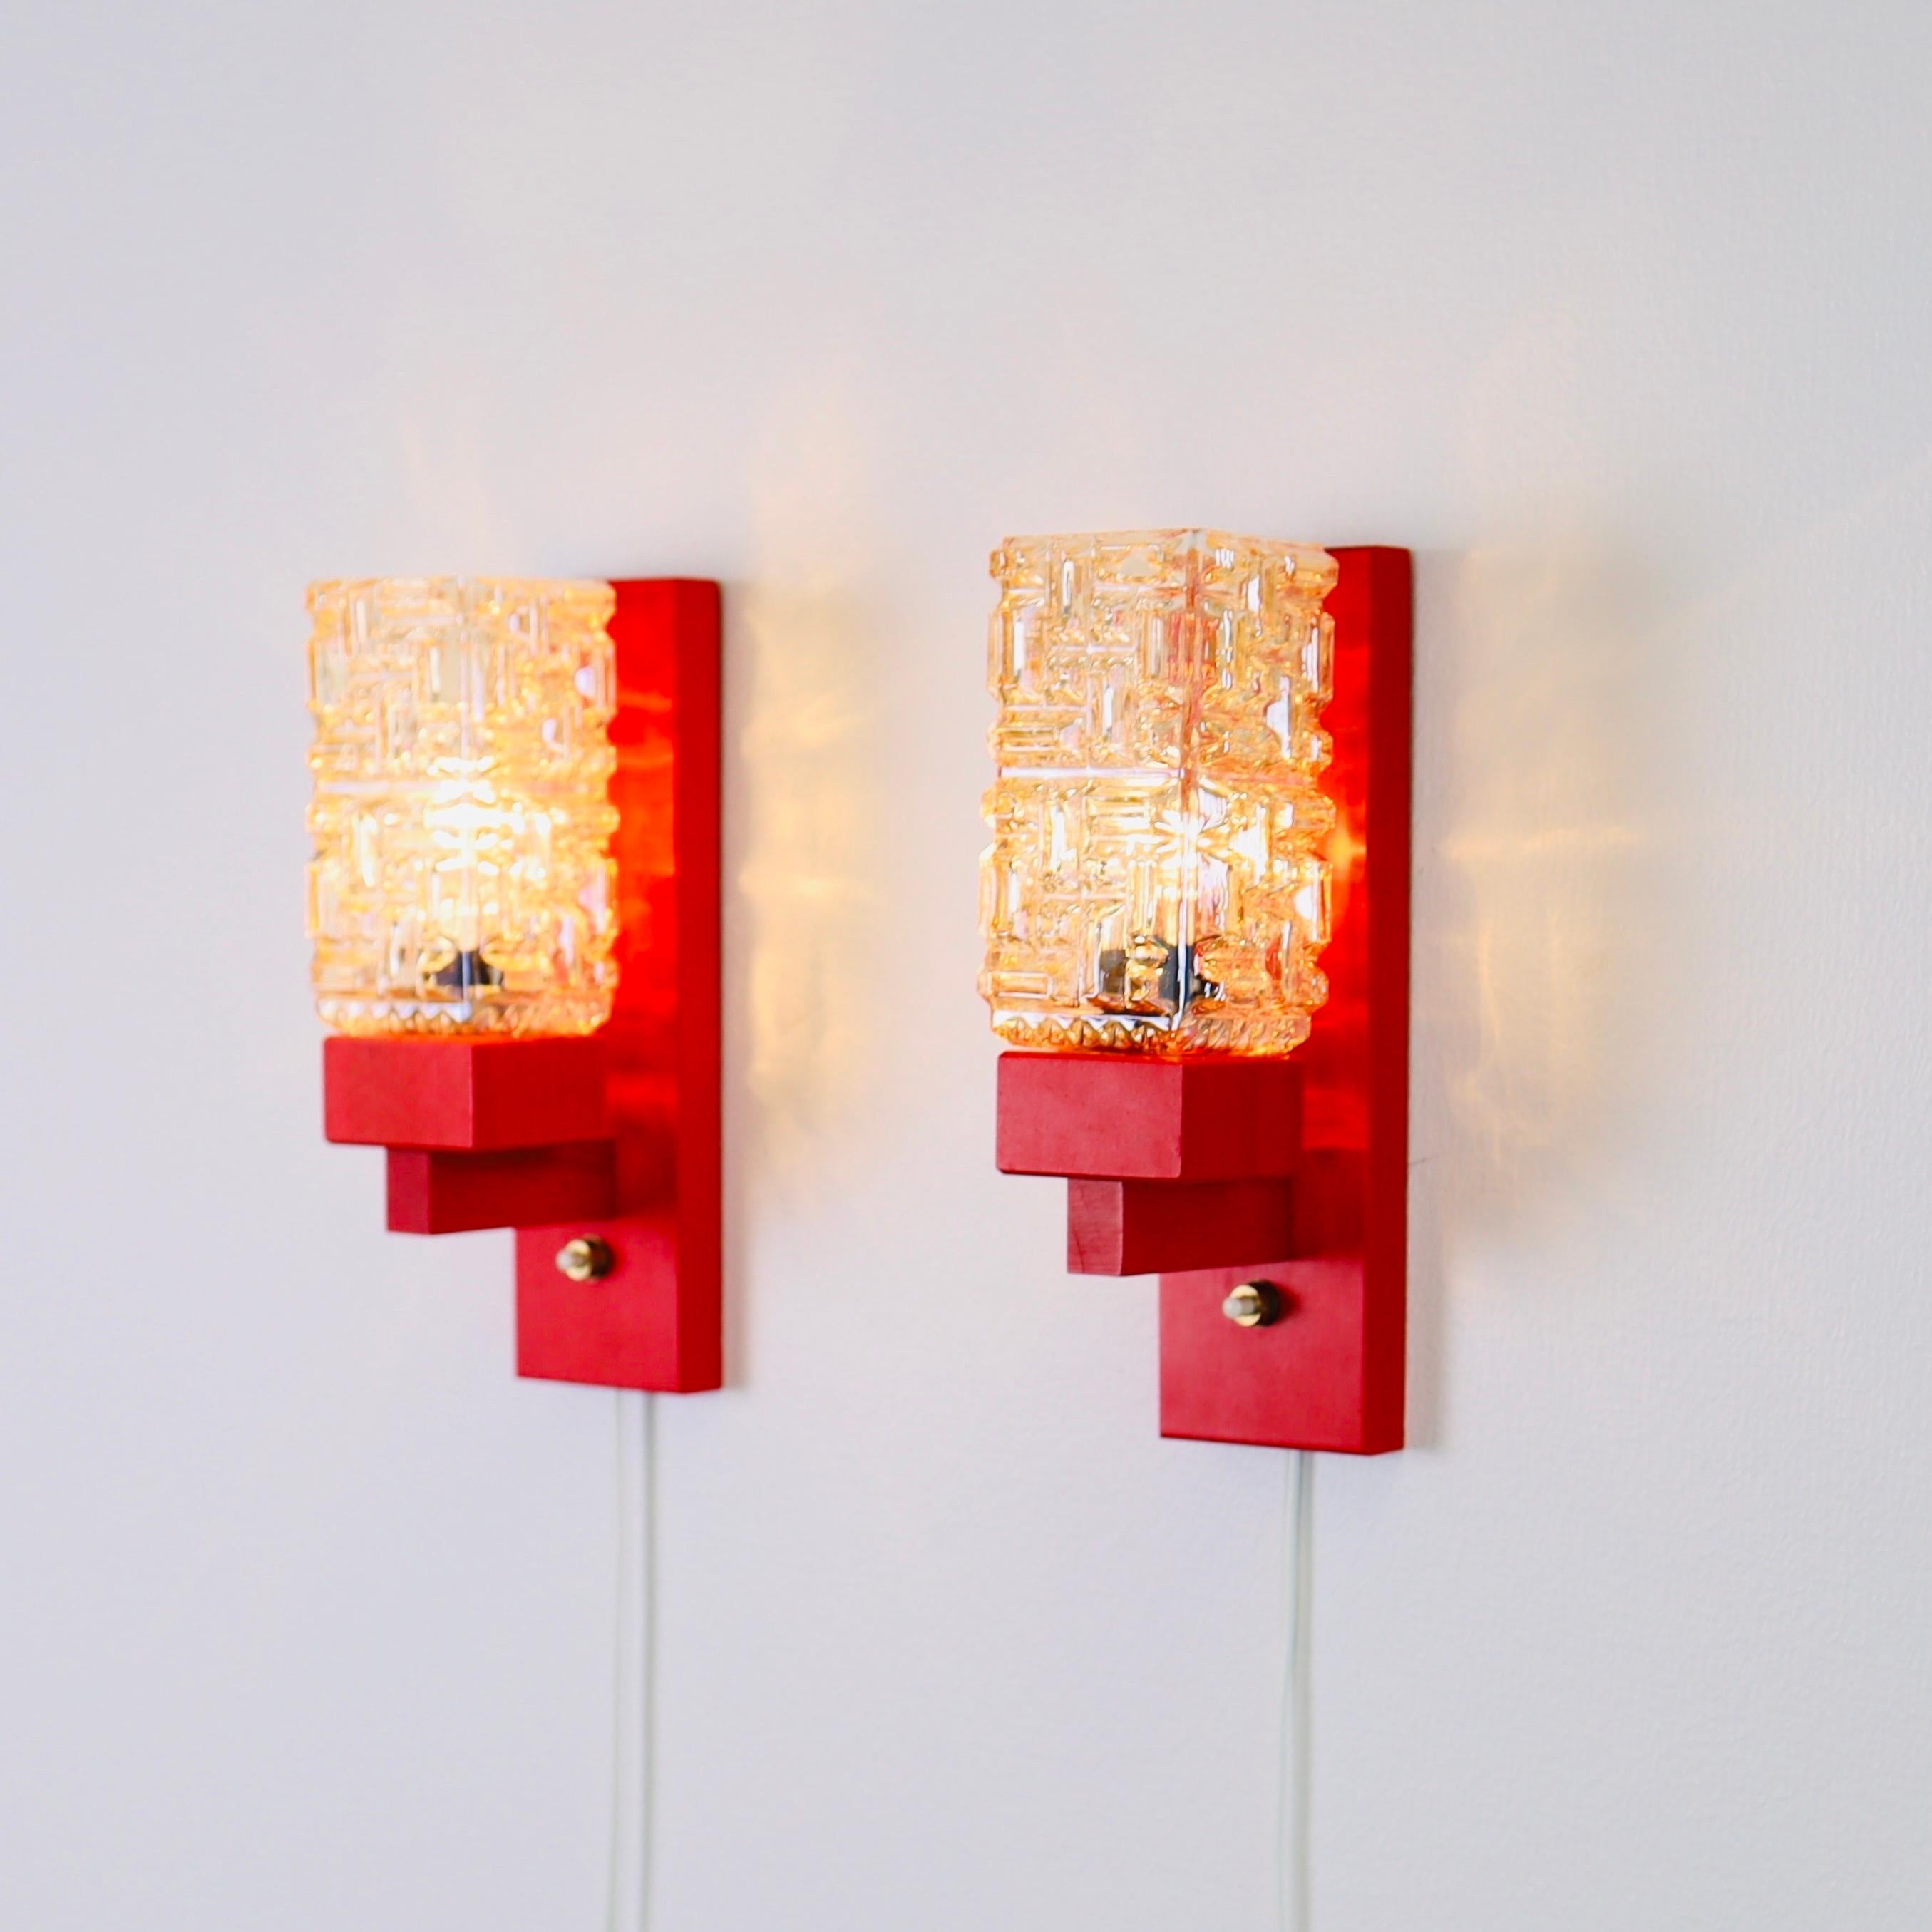 Set of 'Vitrika' Wall Lamps in Red stained wood & Amber Glass, Denmark, 1970s For Sale 2